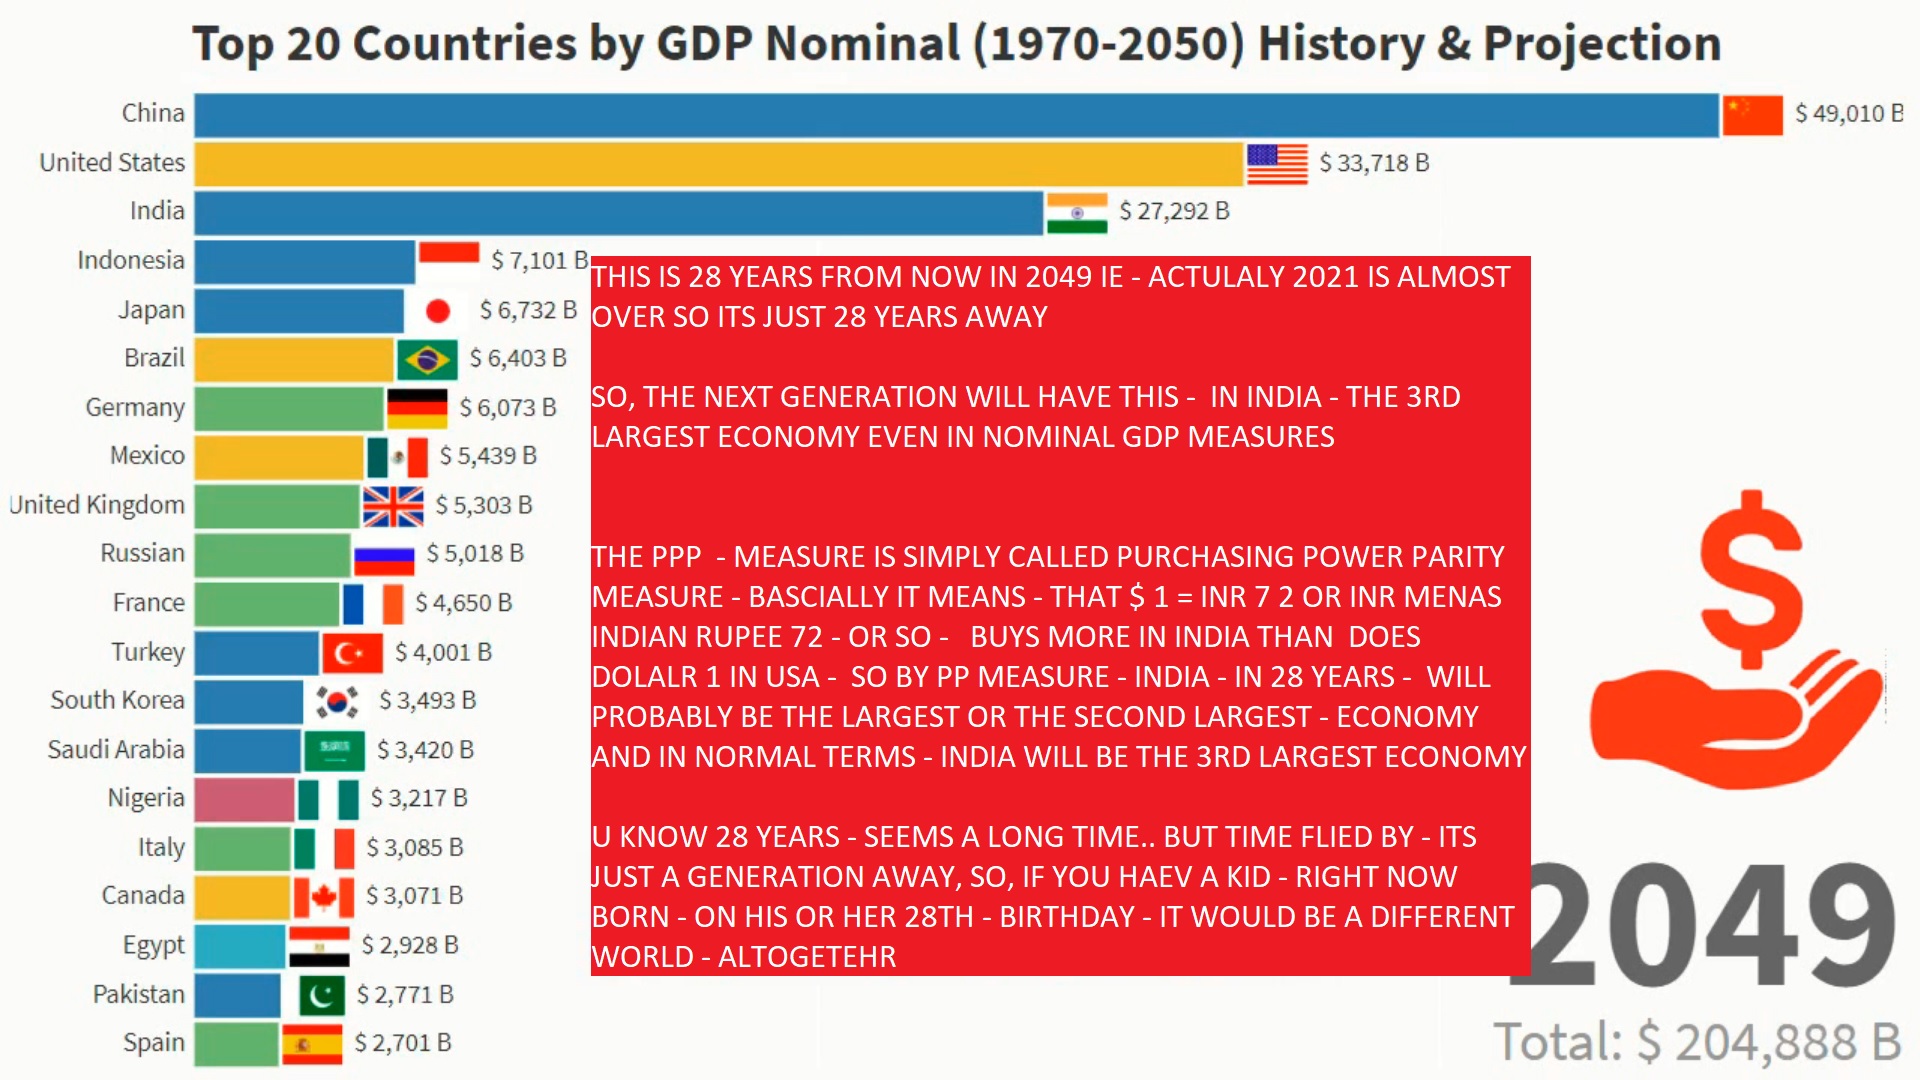 INDIA - NOMIAL GDP - IN 2049 AND 2050 - BY AJAY MISHRA THSI IS NOMINAL GDP PROJECTIONS